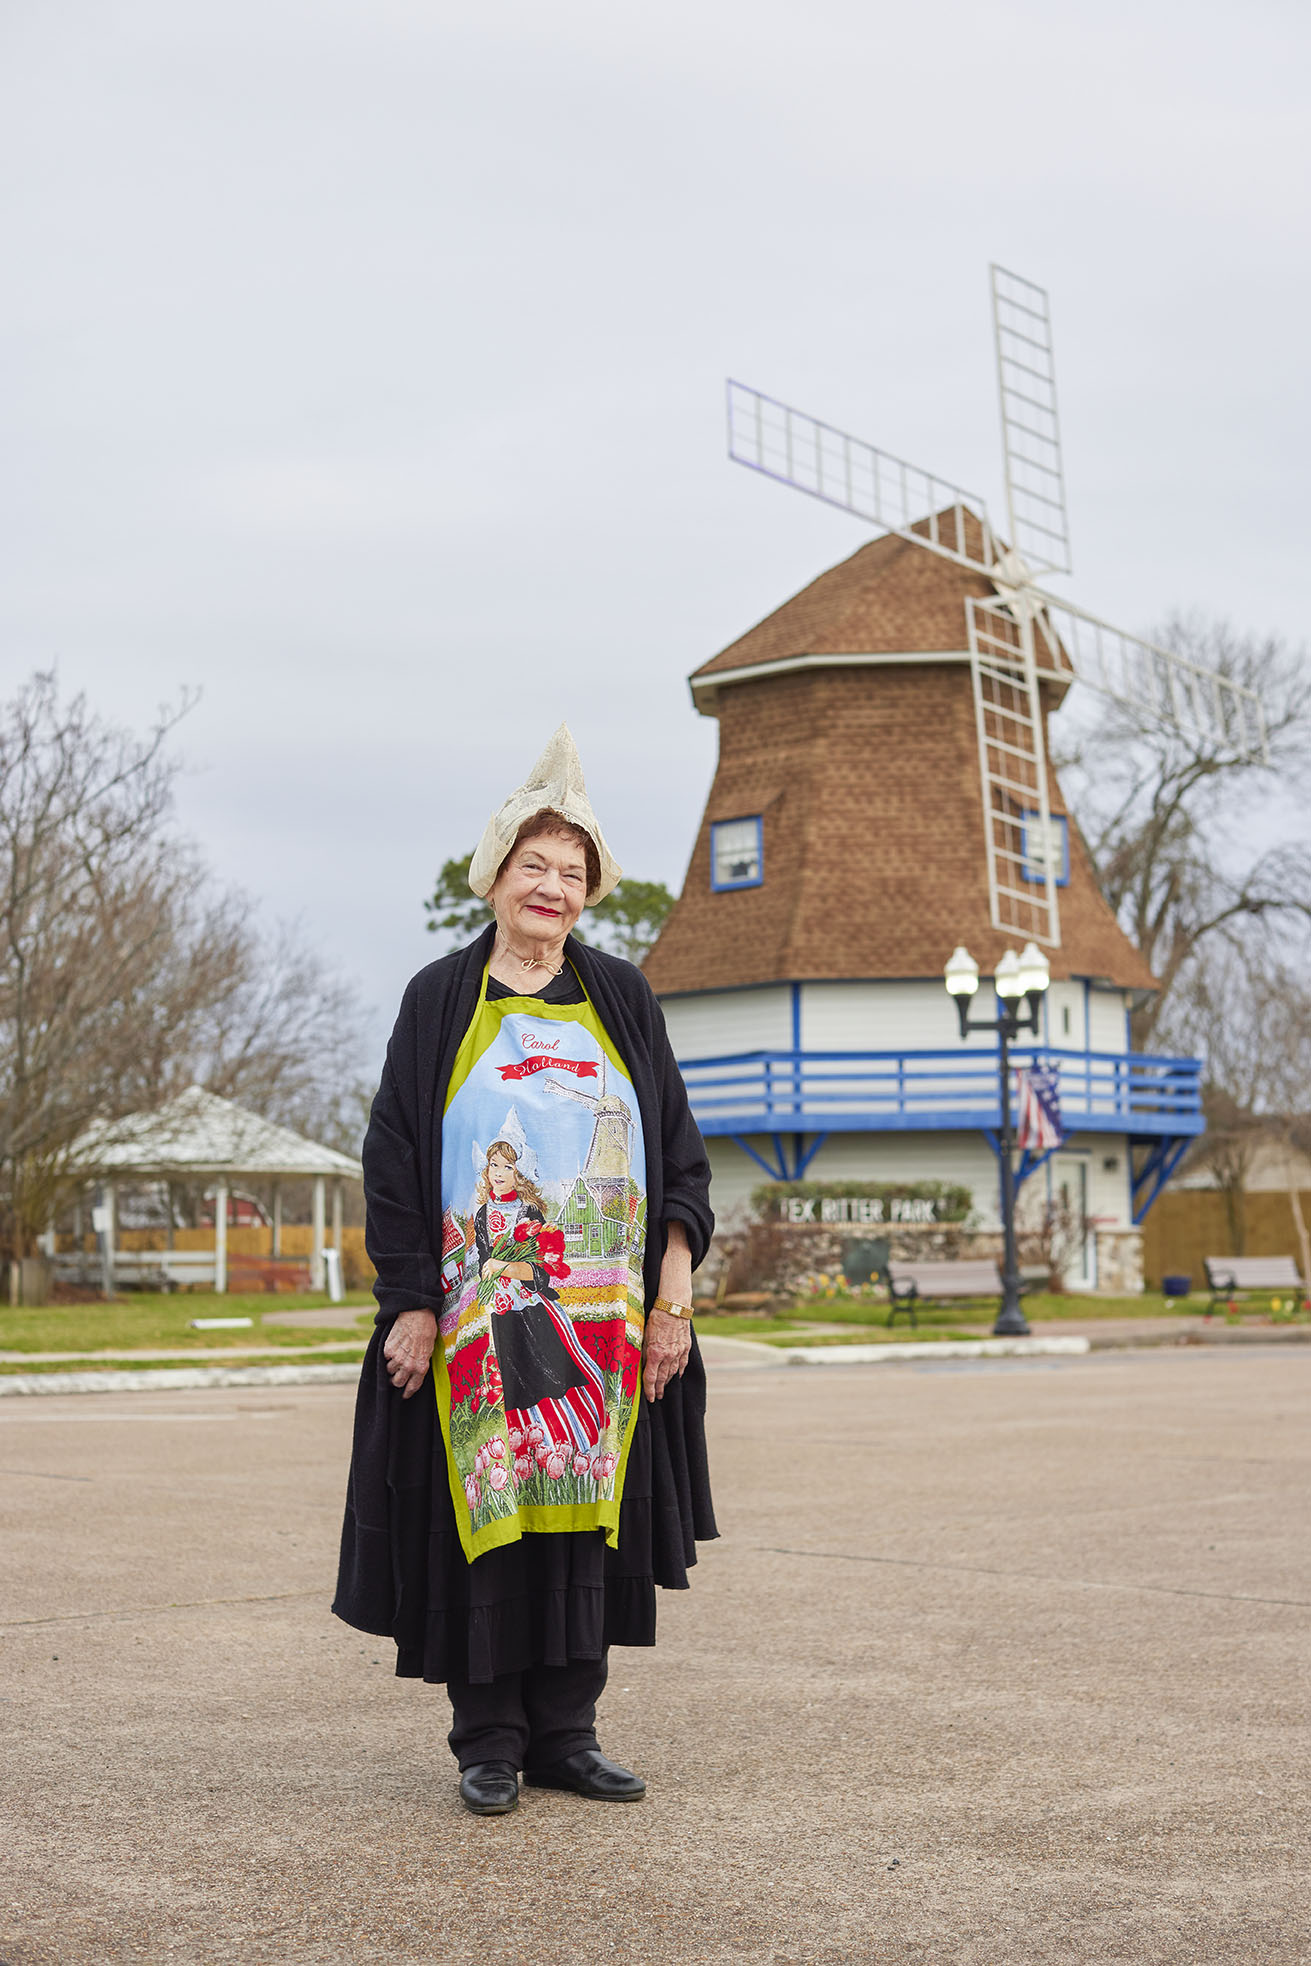 Curator of Dutch Windmill Museum stands in front of building in traditional bonnet.